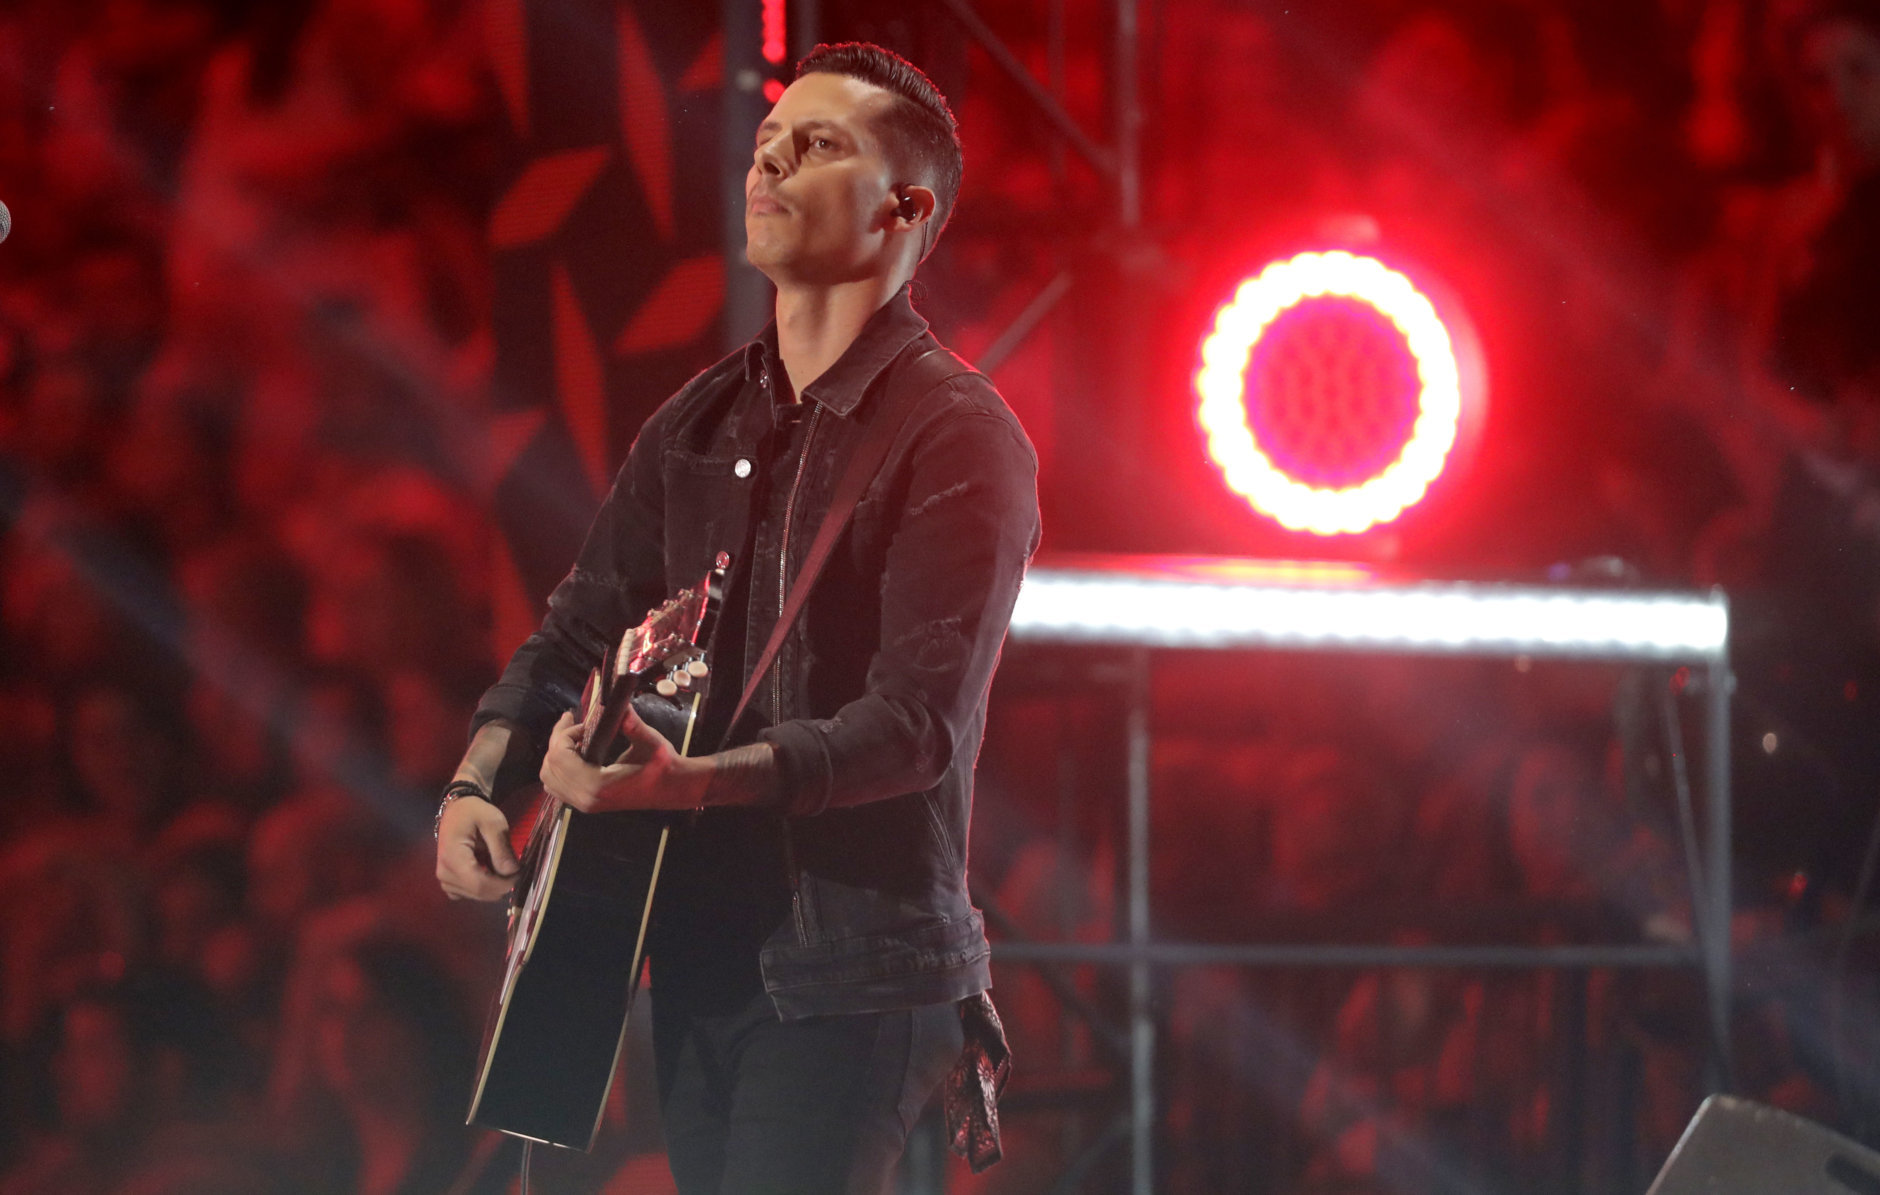 Devin Dawson performs "All On Me" at the CMT Music Awards at the Bridgestone Arena on Wednesday, June 6, 2018, in Nashville, Tenn. (AP Photo/Mark Humphrey)